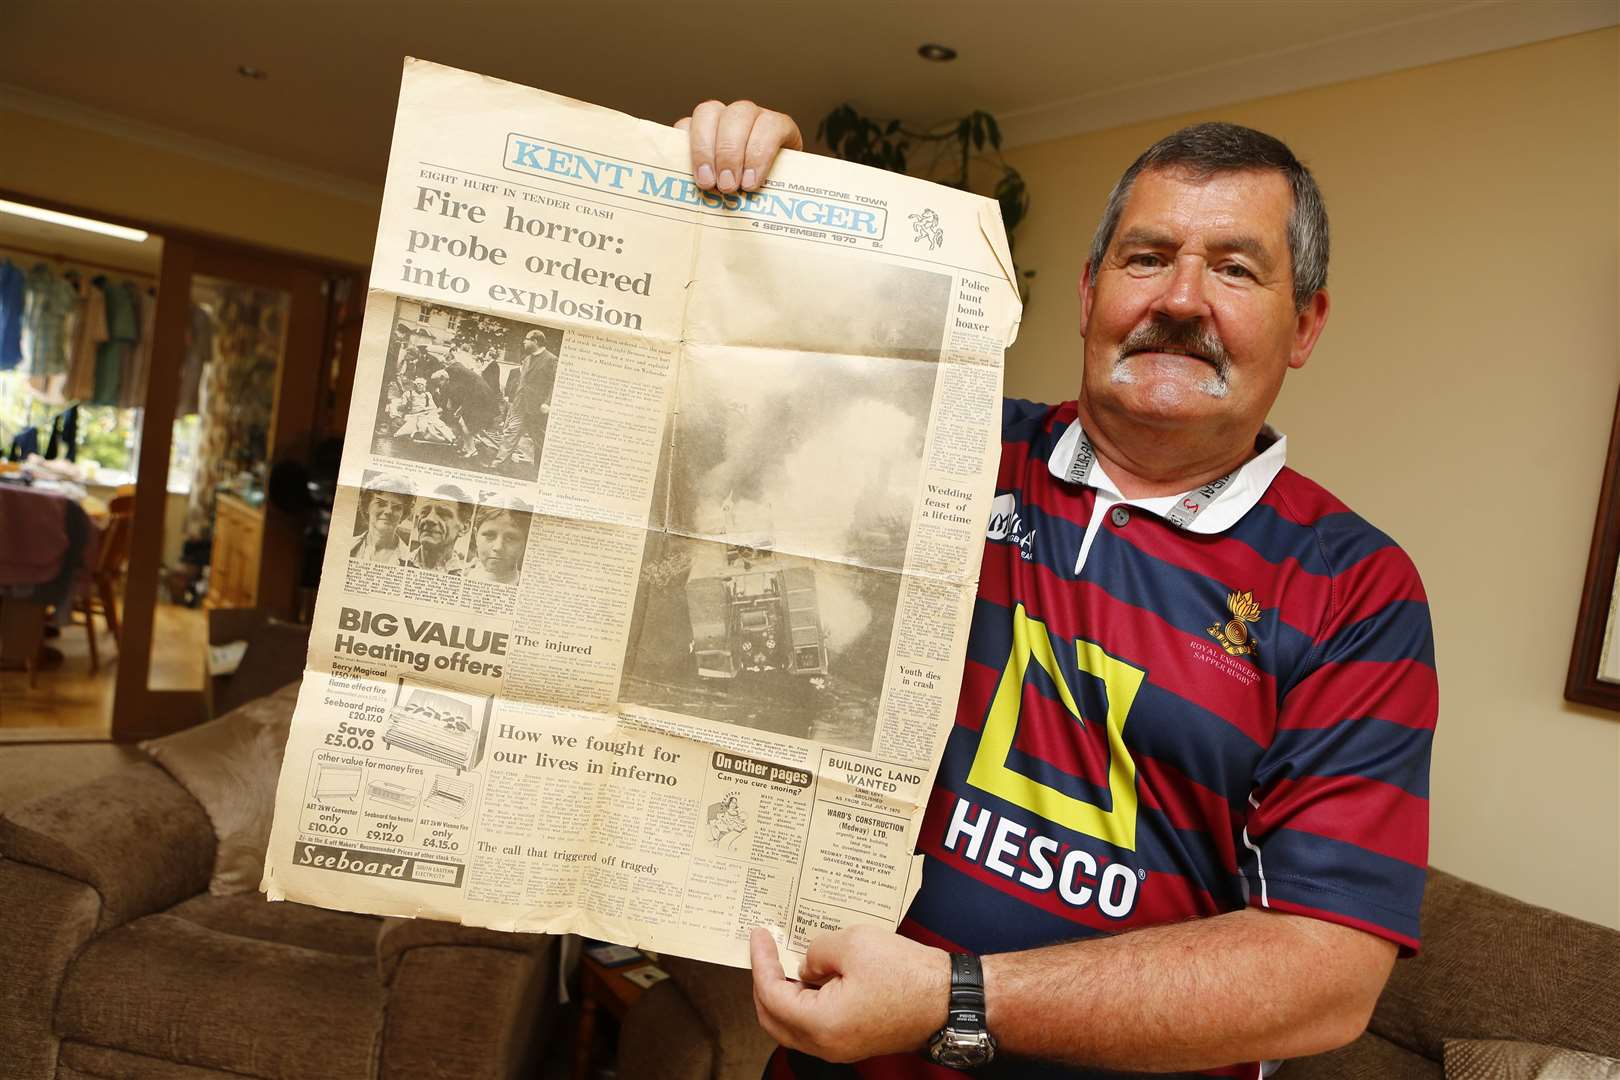 Martyn Barrett, who was 15 at the time, rushed to help the trapped firemen. He is pictured with his copy of the Kent Messenger's coverage of the crash